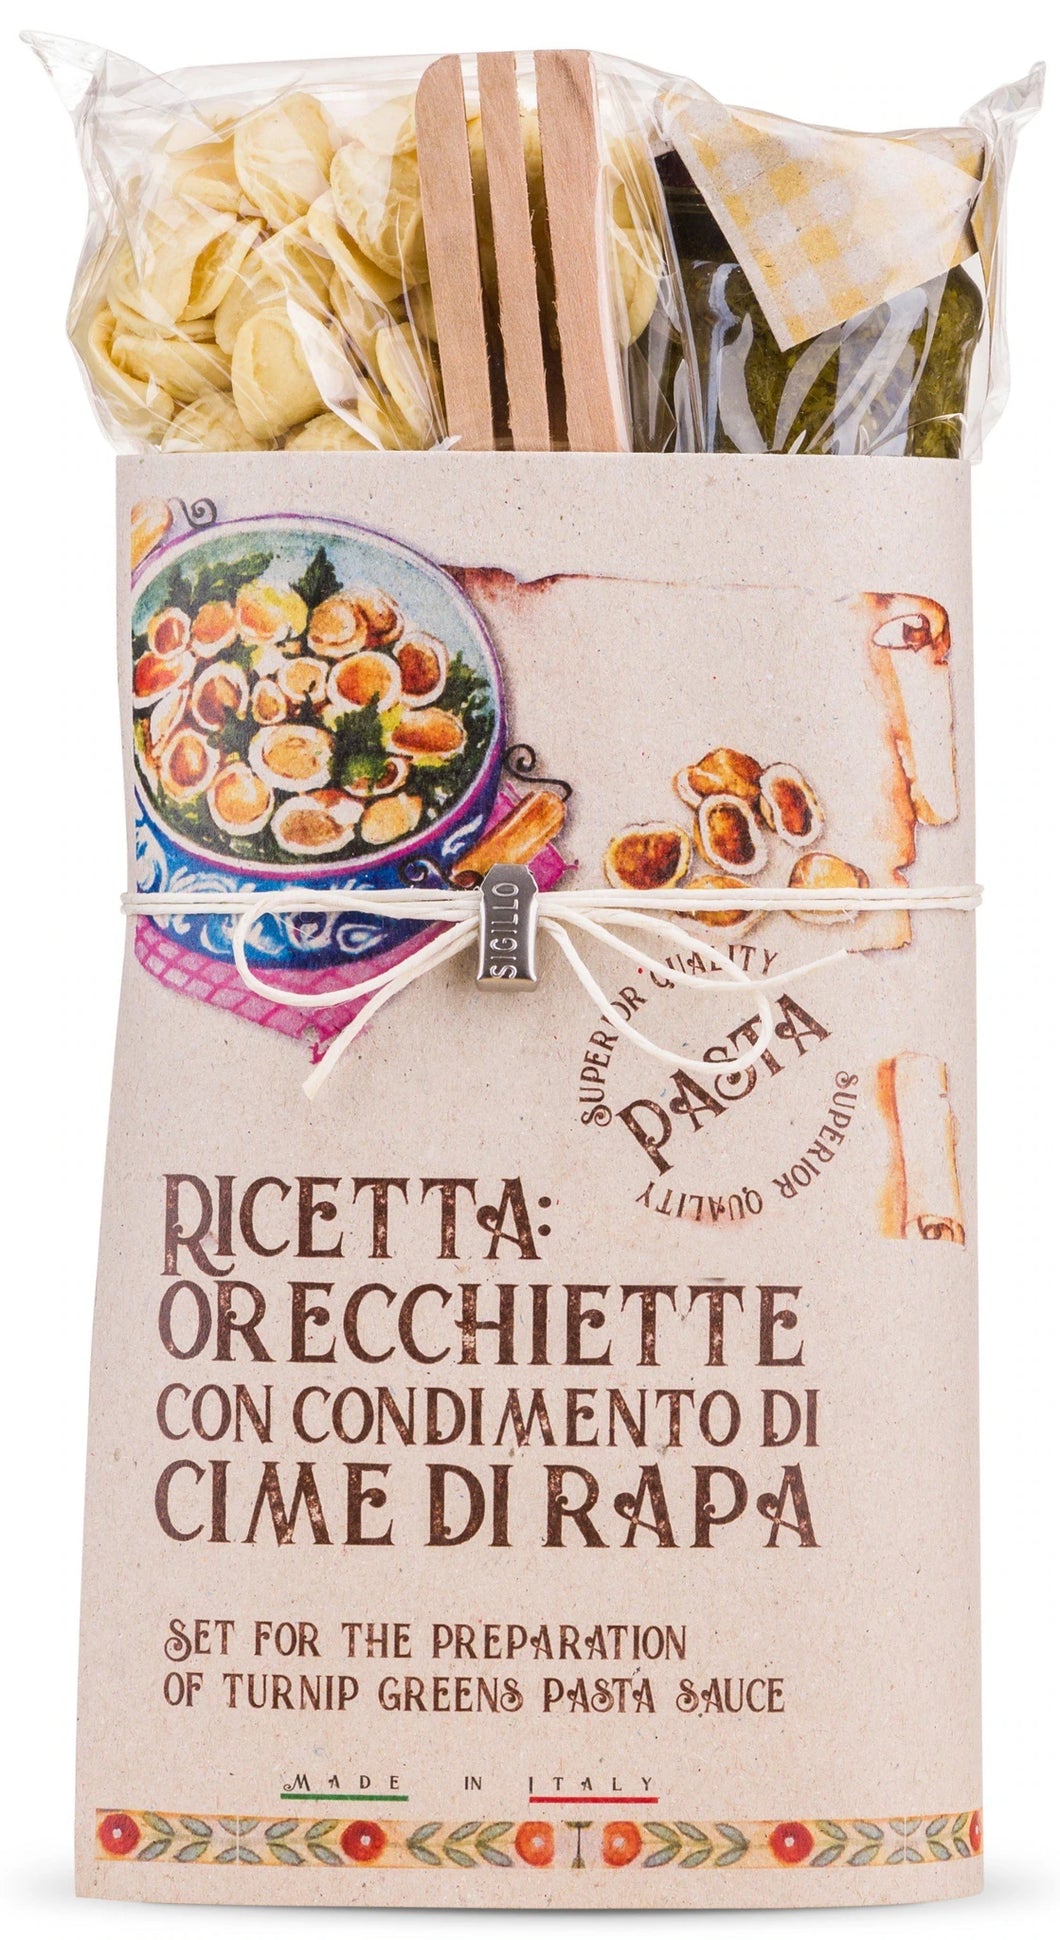 Organic Maccheroni Pasta with Broccoli Rapa Green Sace gift set with wooden spoon by 